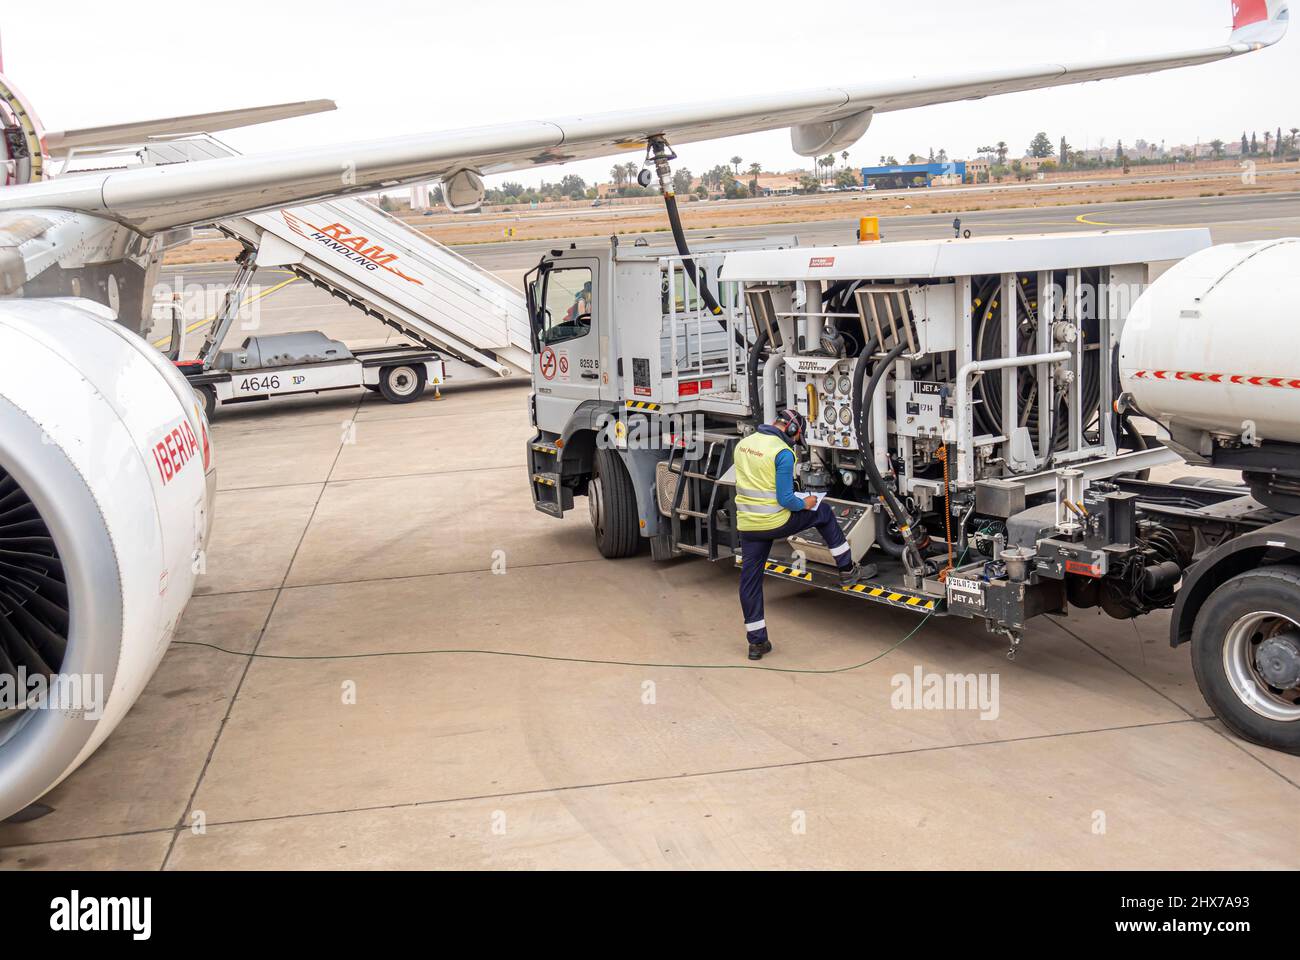 A worker employee refueling Iberia airlines Airbus A320 twin-engine jet aircraft airplane in Marrakesh Menara Airport, Morocco, North Africa Stock Photo